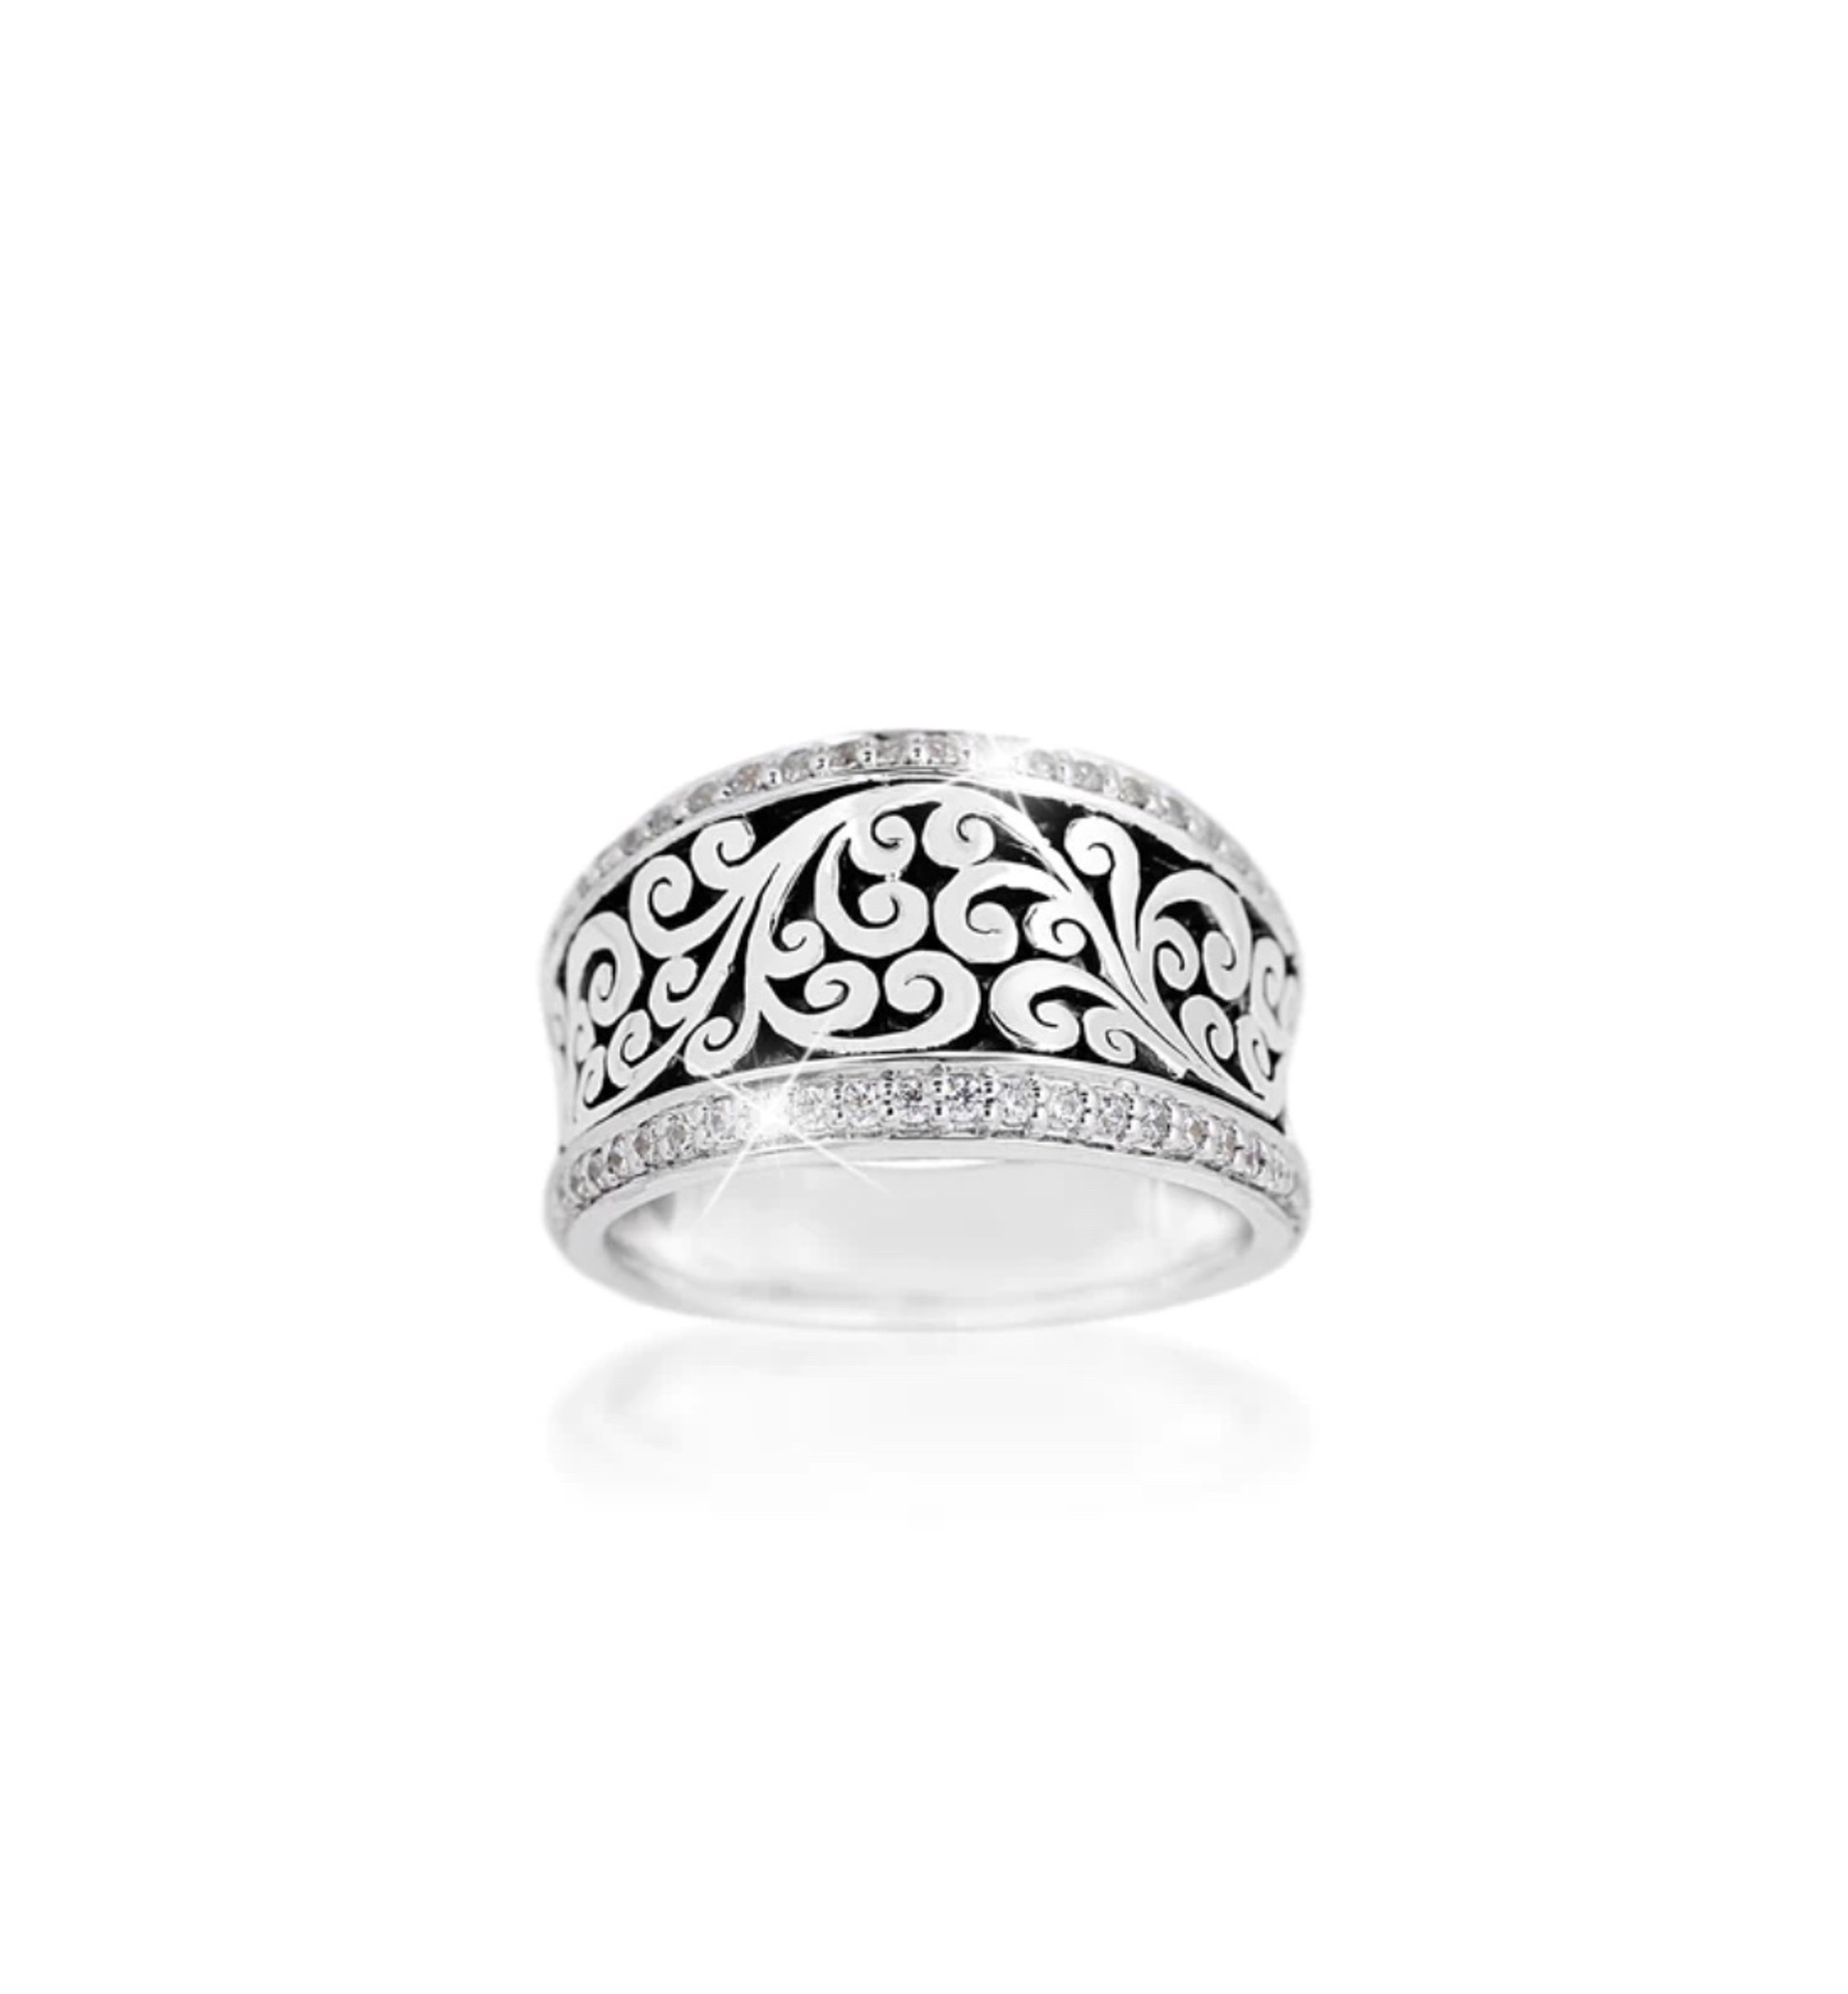 7039 Parallel Diamond (0.33 CT) Outline with Classic Signature Lois Hill Scroll Focus Ring (13mm) by Lois Hill